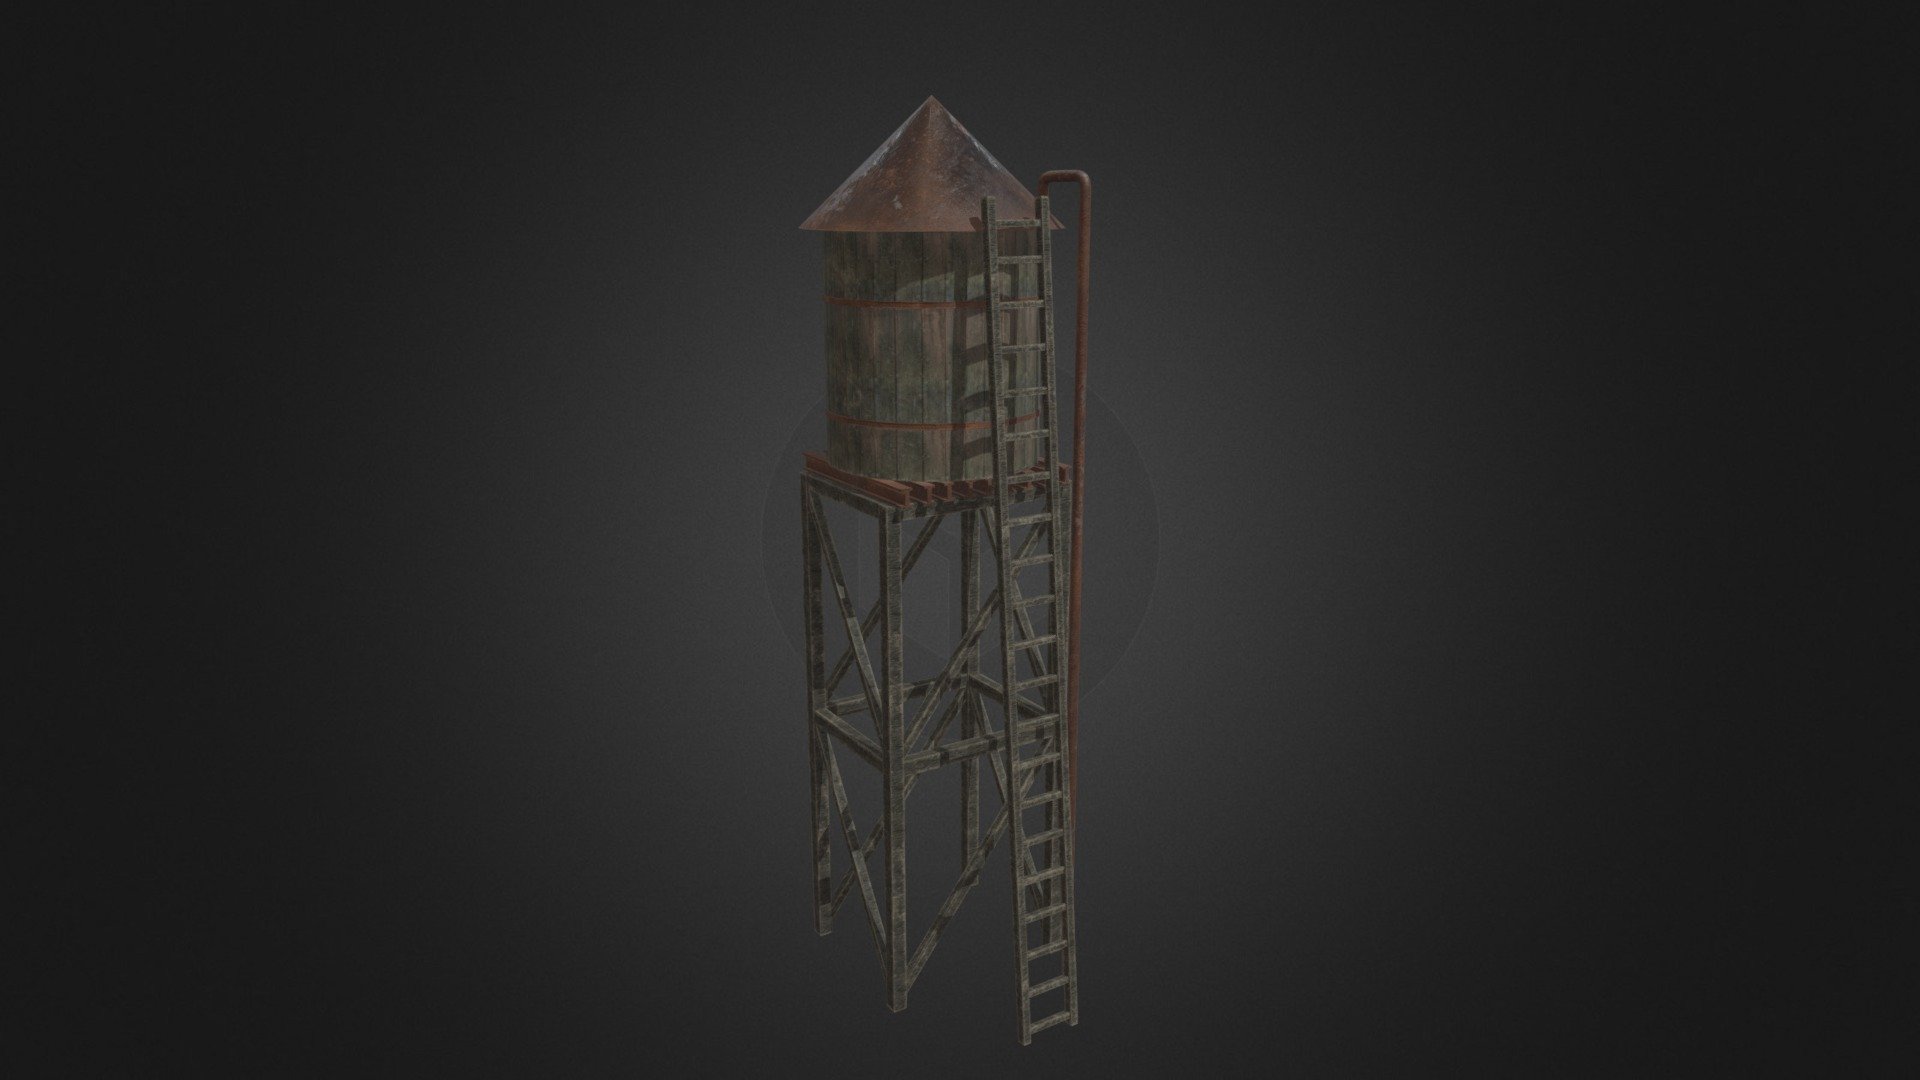 This water tower was made for environment design, with rustic and wear on the exterior 3d model